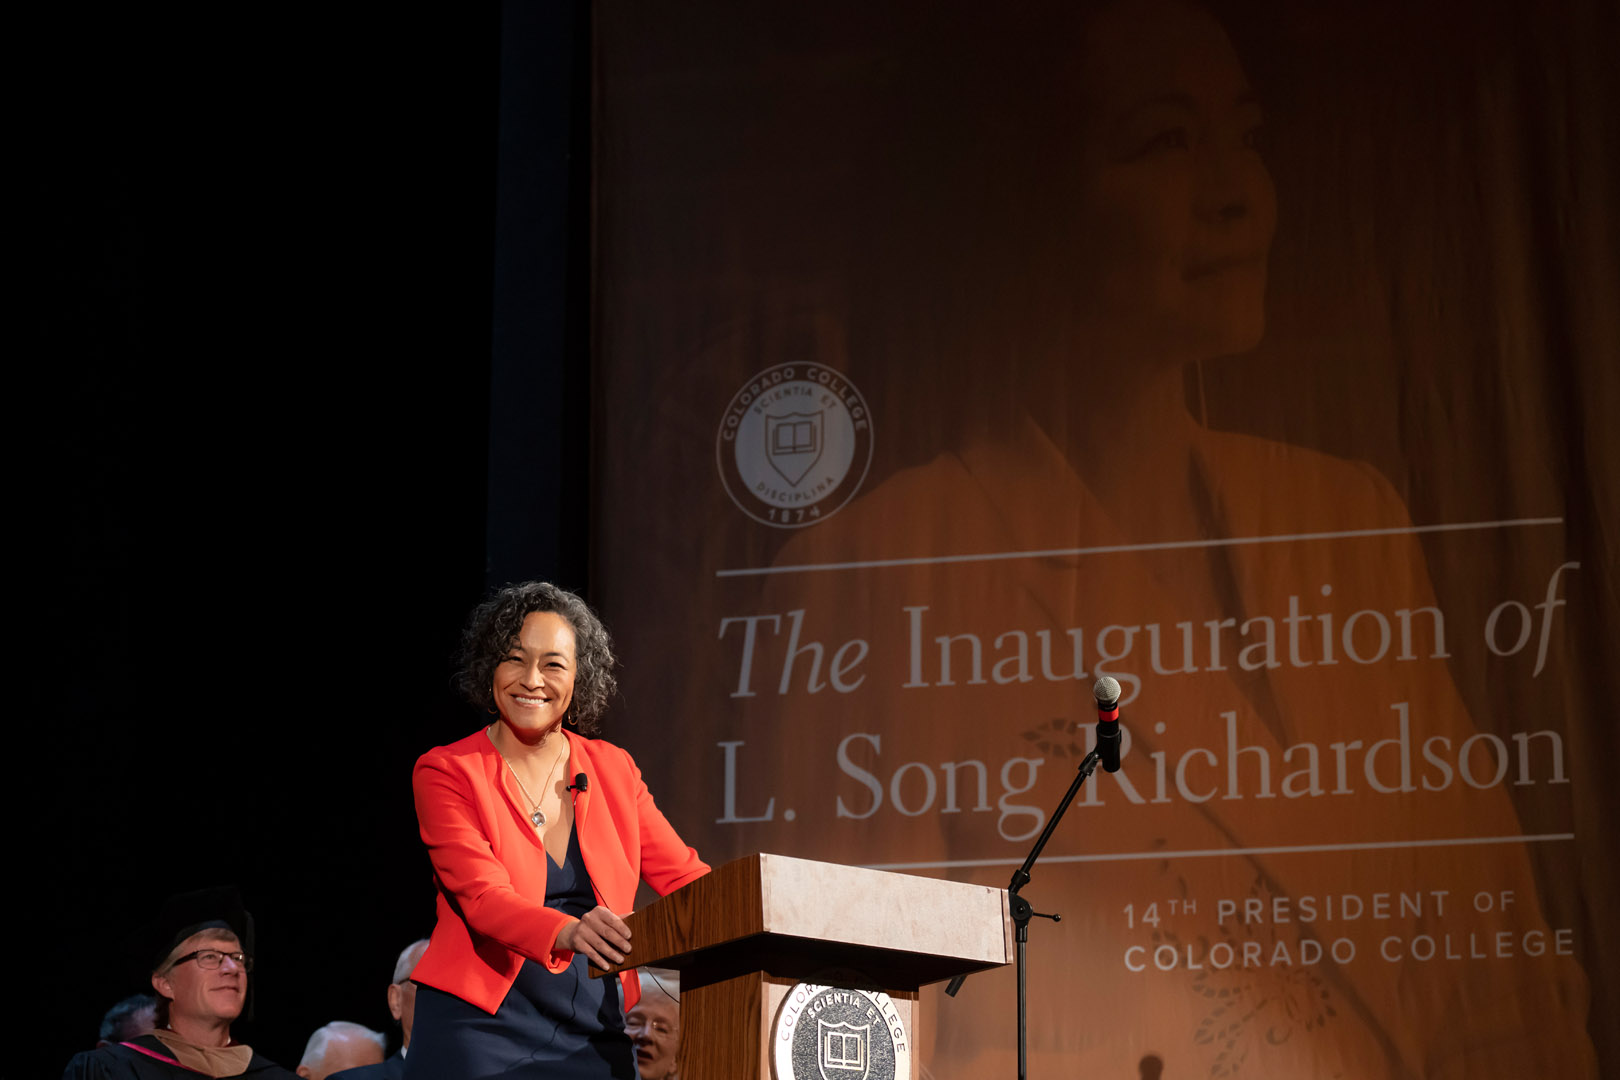 The Inauguration of L. Song Richardson, the 14th President of Colorado College on Monday, 8/29/22. <span class="cc-gallery-credit">[Photo by Lonnie Timmons III]</span>